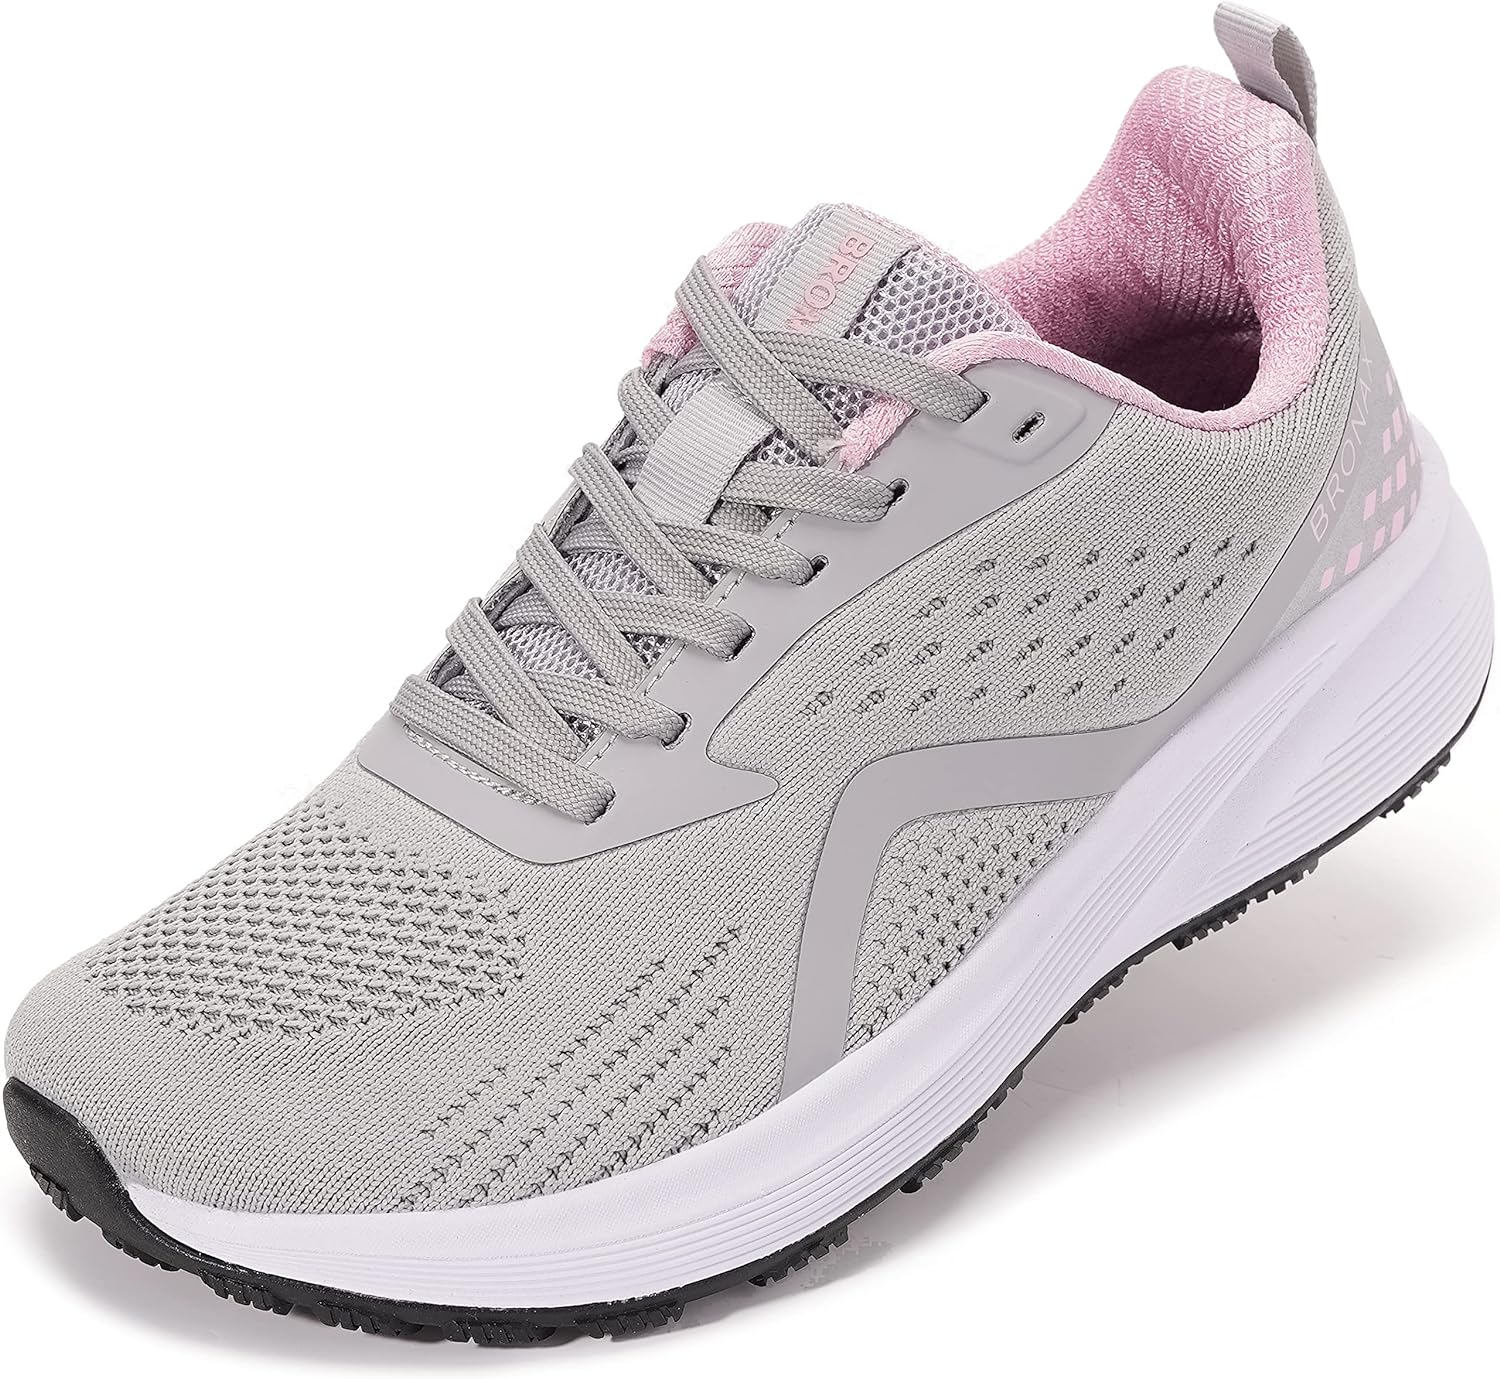 BRONAX Women' Wide Toe Box Road Running Shoes | Wide Athletic Tennis Sneakers with Rubber Outsole